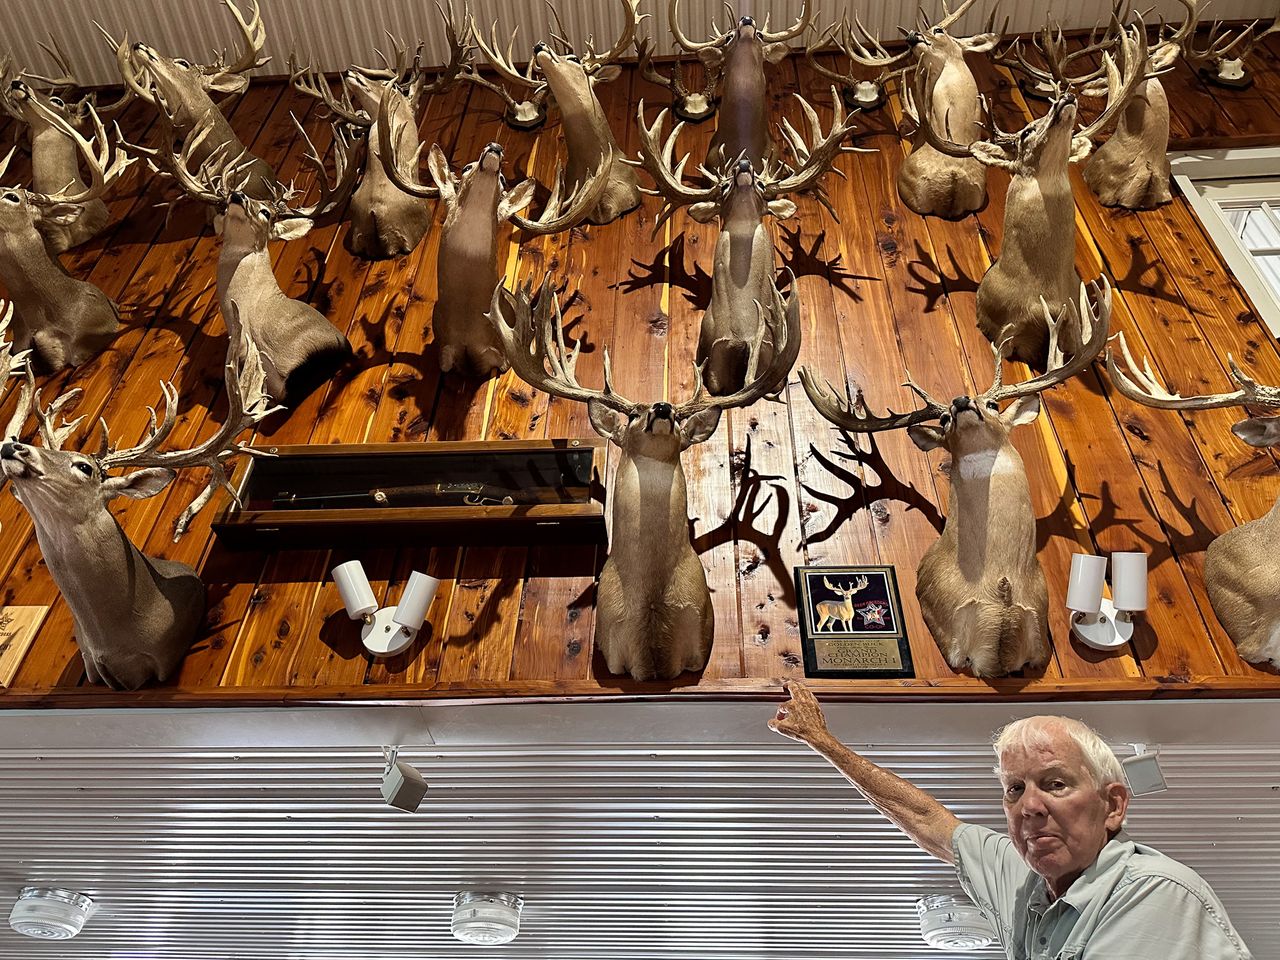 Robert Williams, owner of RW Trophy Ranch, stands before a wall of shoulder mounts made from antler sheds of deer he's bred over a three-decade career.